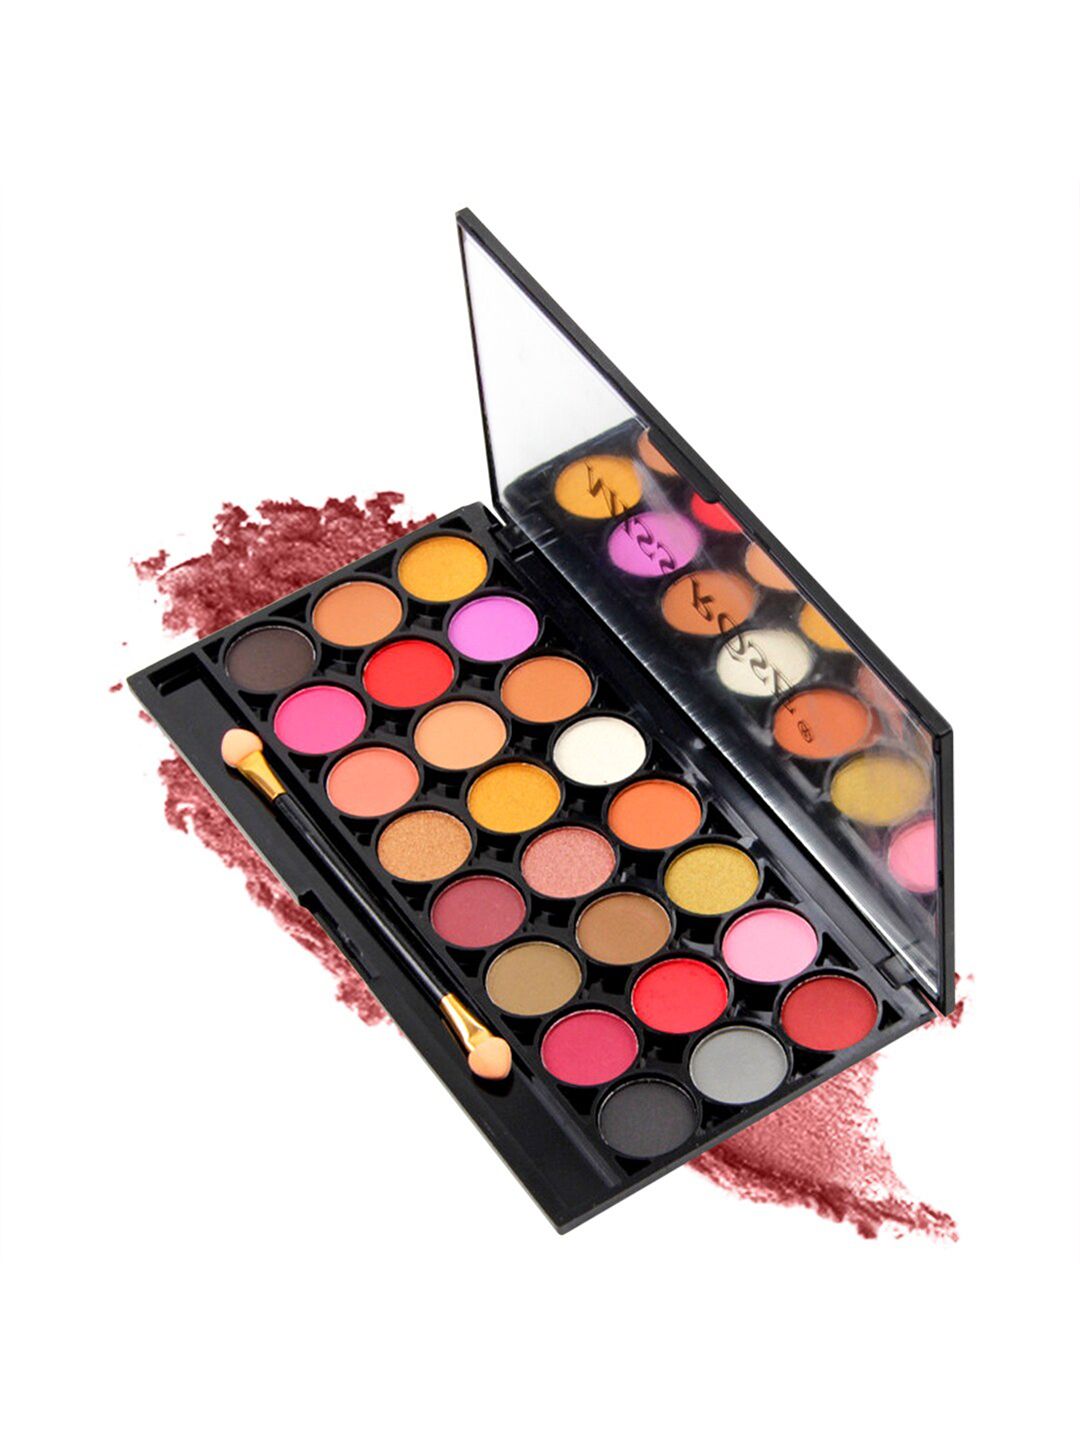 MISS ROSE Muliticolored Matte Eyeshadow Palette 7001-356 MY02 Price in India